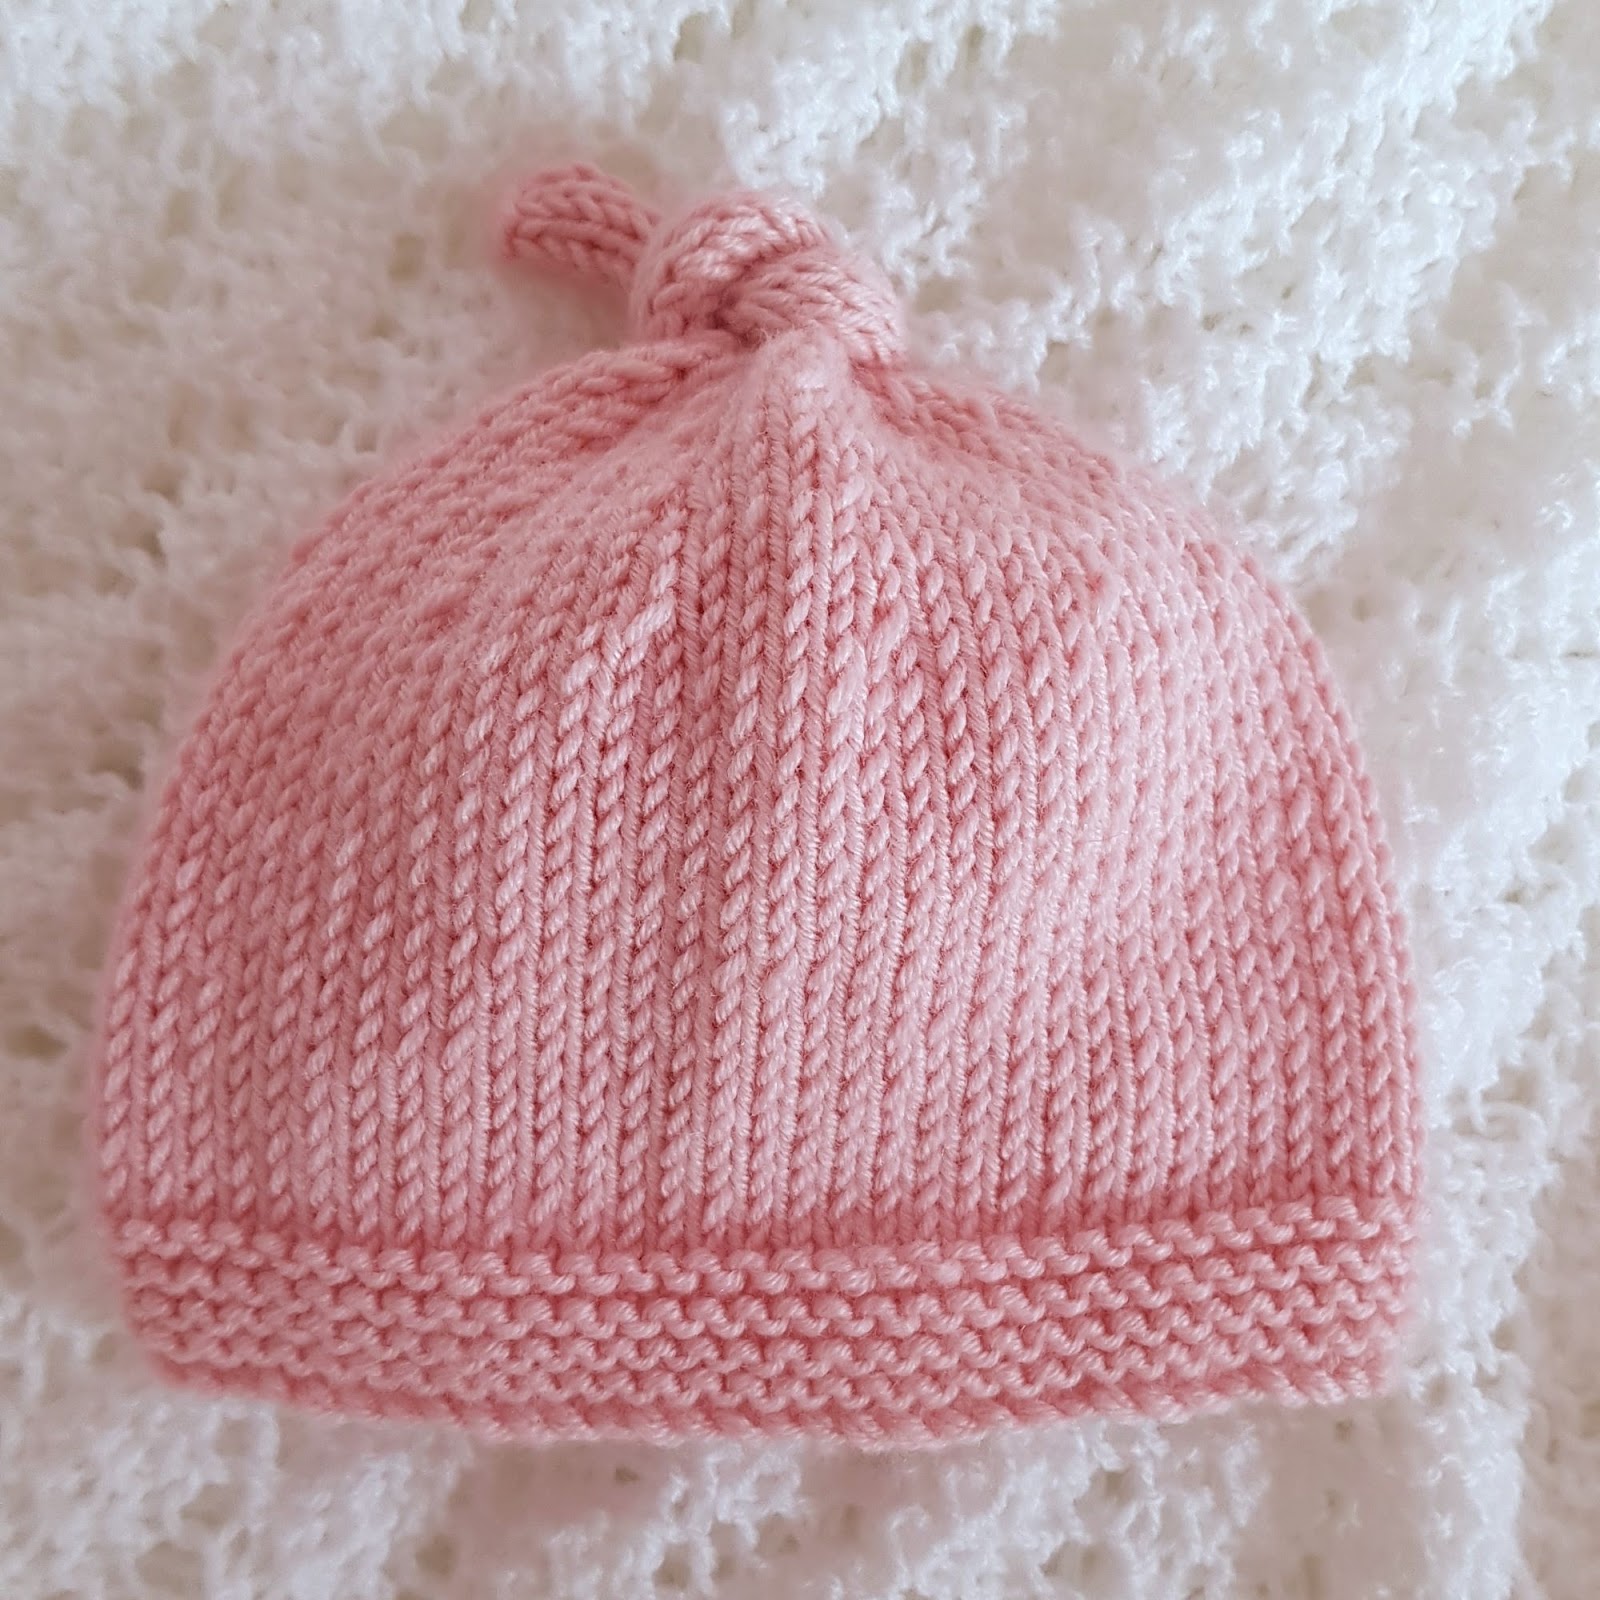 A Playful Stitch: Knitted Baby Hat